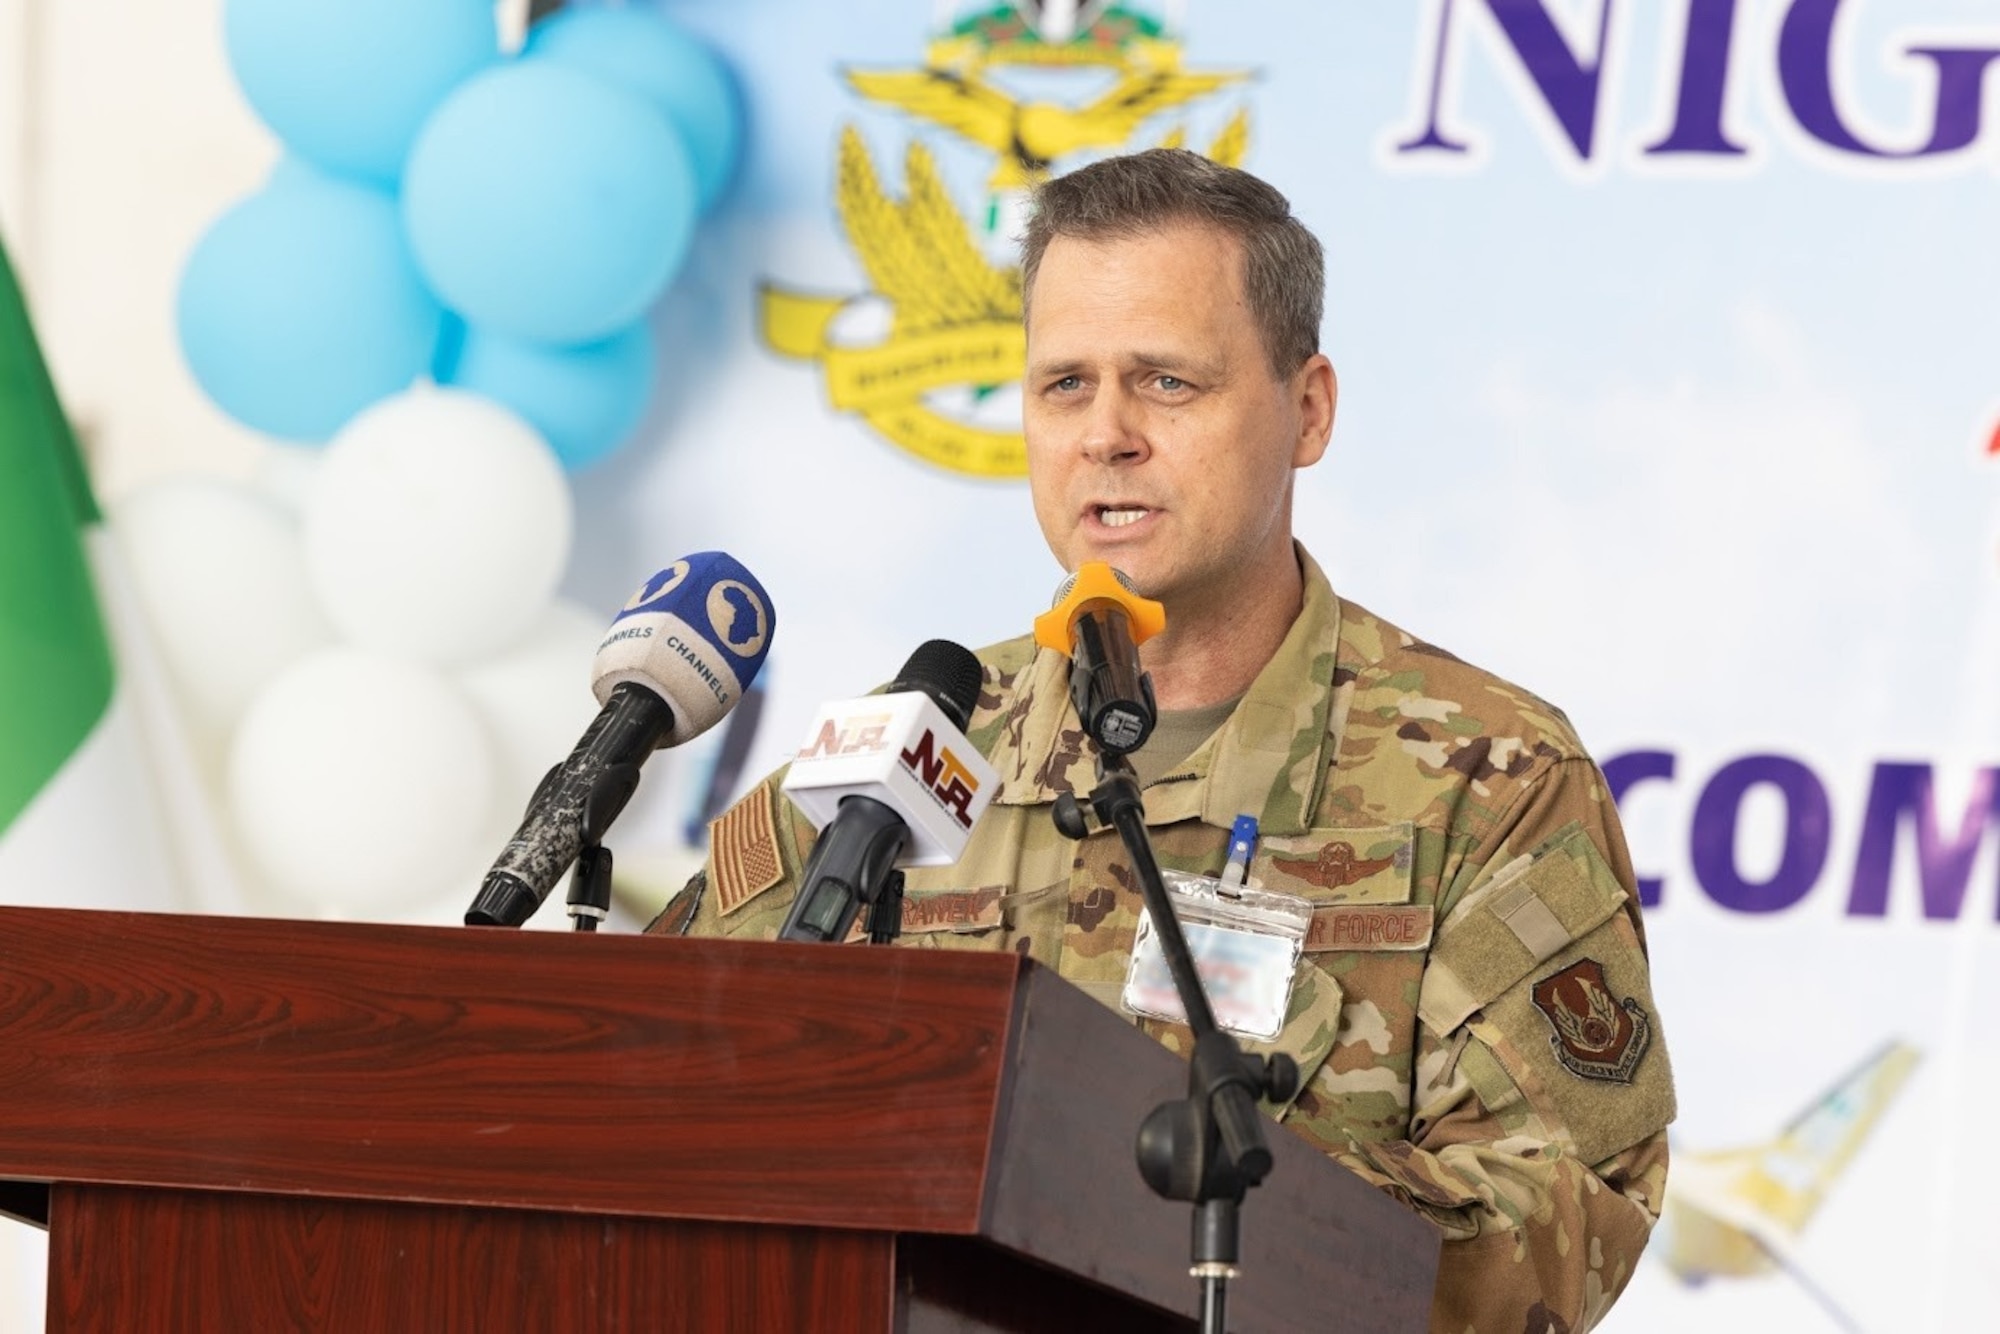 Director of the Air Force Life Cycle Management Center's Air Force Security Assistance and Cooperation Directorate Brig. Gen. Joel Safranek gives remarks at Kainji Air Force Base in Nigeria during ceremonies celebrating recently completed base infrastructure improvements there April 27, 2023. He participated in ribbon cutting ceremonies highlighting the completion of several construction projects supporting recently delivered A-29 Super Tucano aircraft. The construction was part of the historic $500 million U.S. foreign military sale to Nigeria, which also includes the delivery of the 12 A-29 Super Tucano aircraft, munitions, and training. (U.S. Embassy in Nigeria photo by Olaoluwa Aworinde)